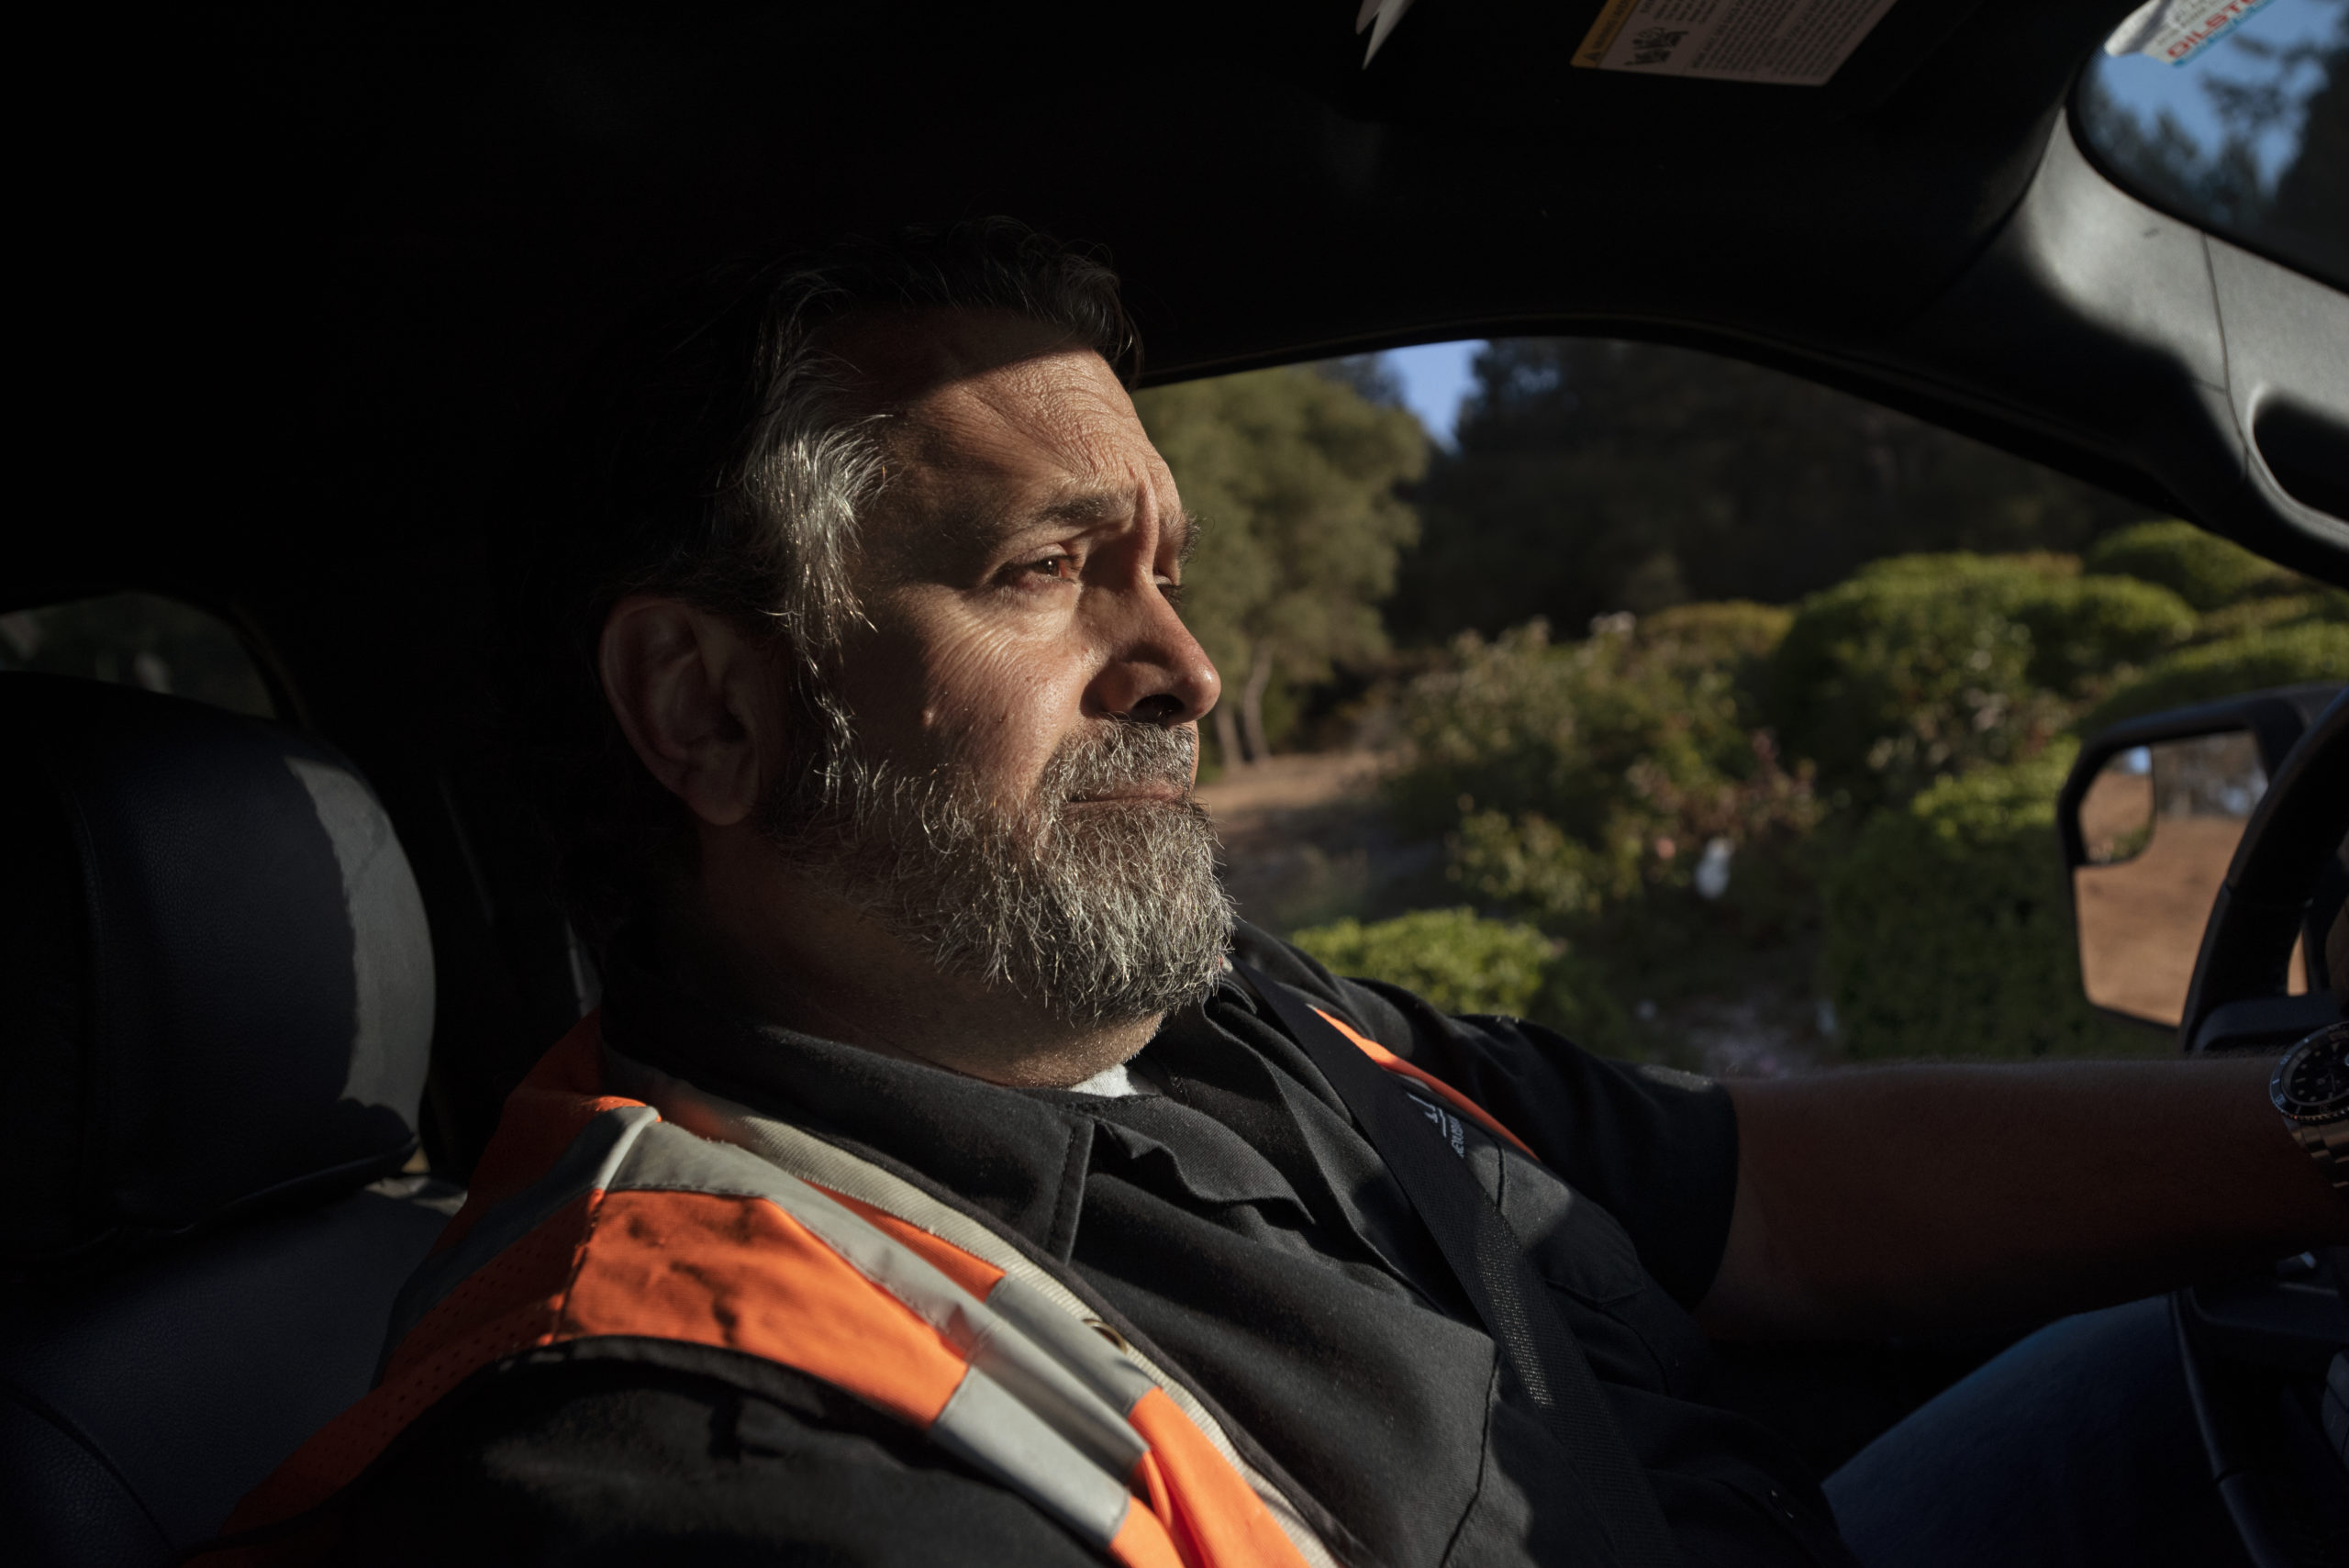 Tony Bugica, director of farming and business development of Atlas Vineyard Management, in his truck after checking in on his vineyard crew members at Cohn Vineyard in Healdsburg, California. July 23, 2021. (Photo: Erik Castro/for Sonoma Magazine)